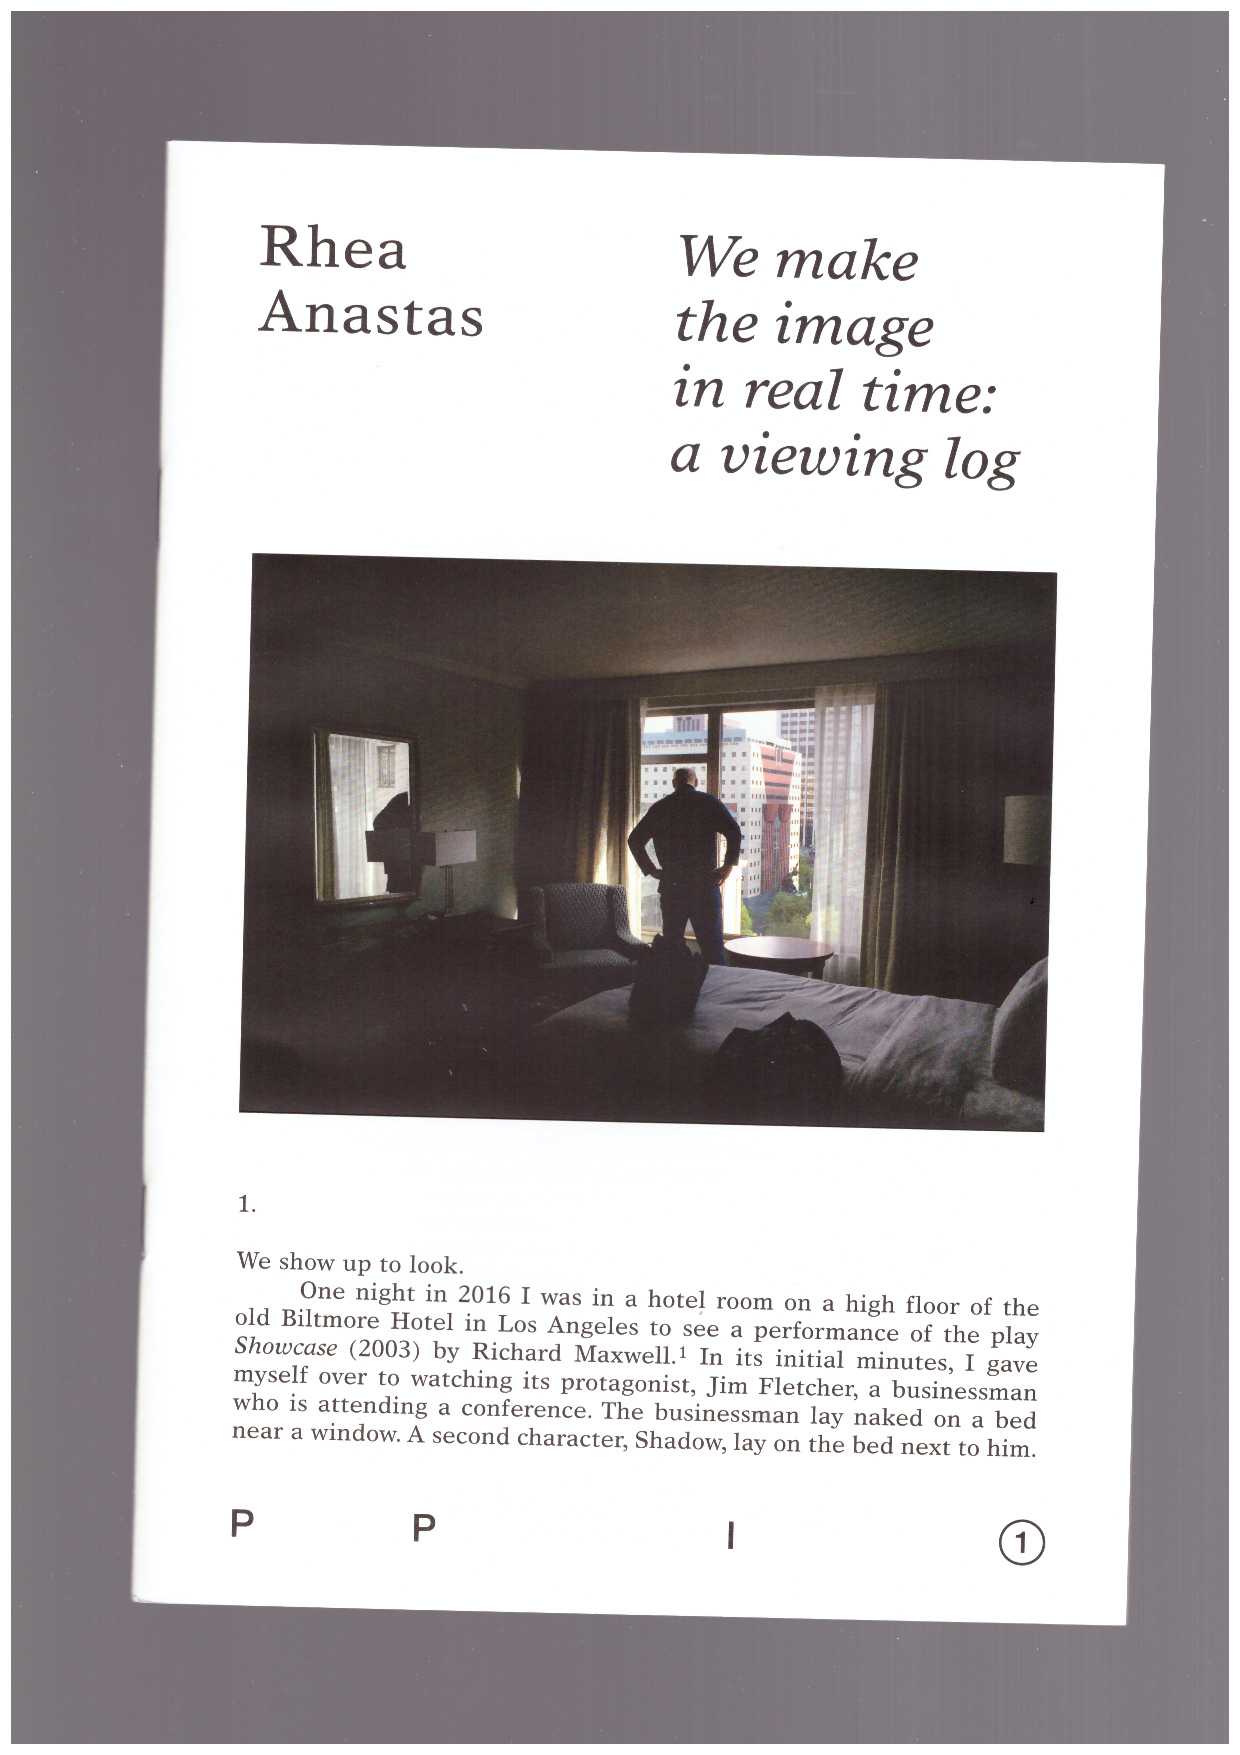 ANASTAS, Rhea - Pound Per Image #1 – We make the image in real time: a viewing log